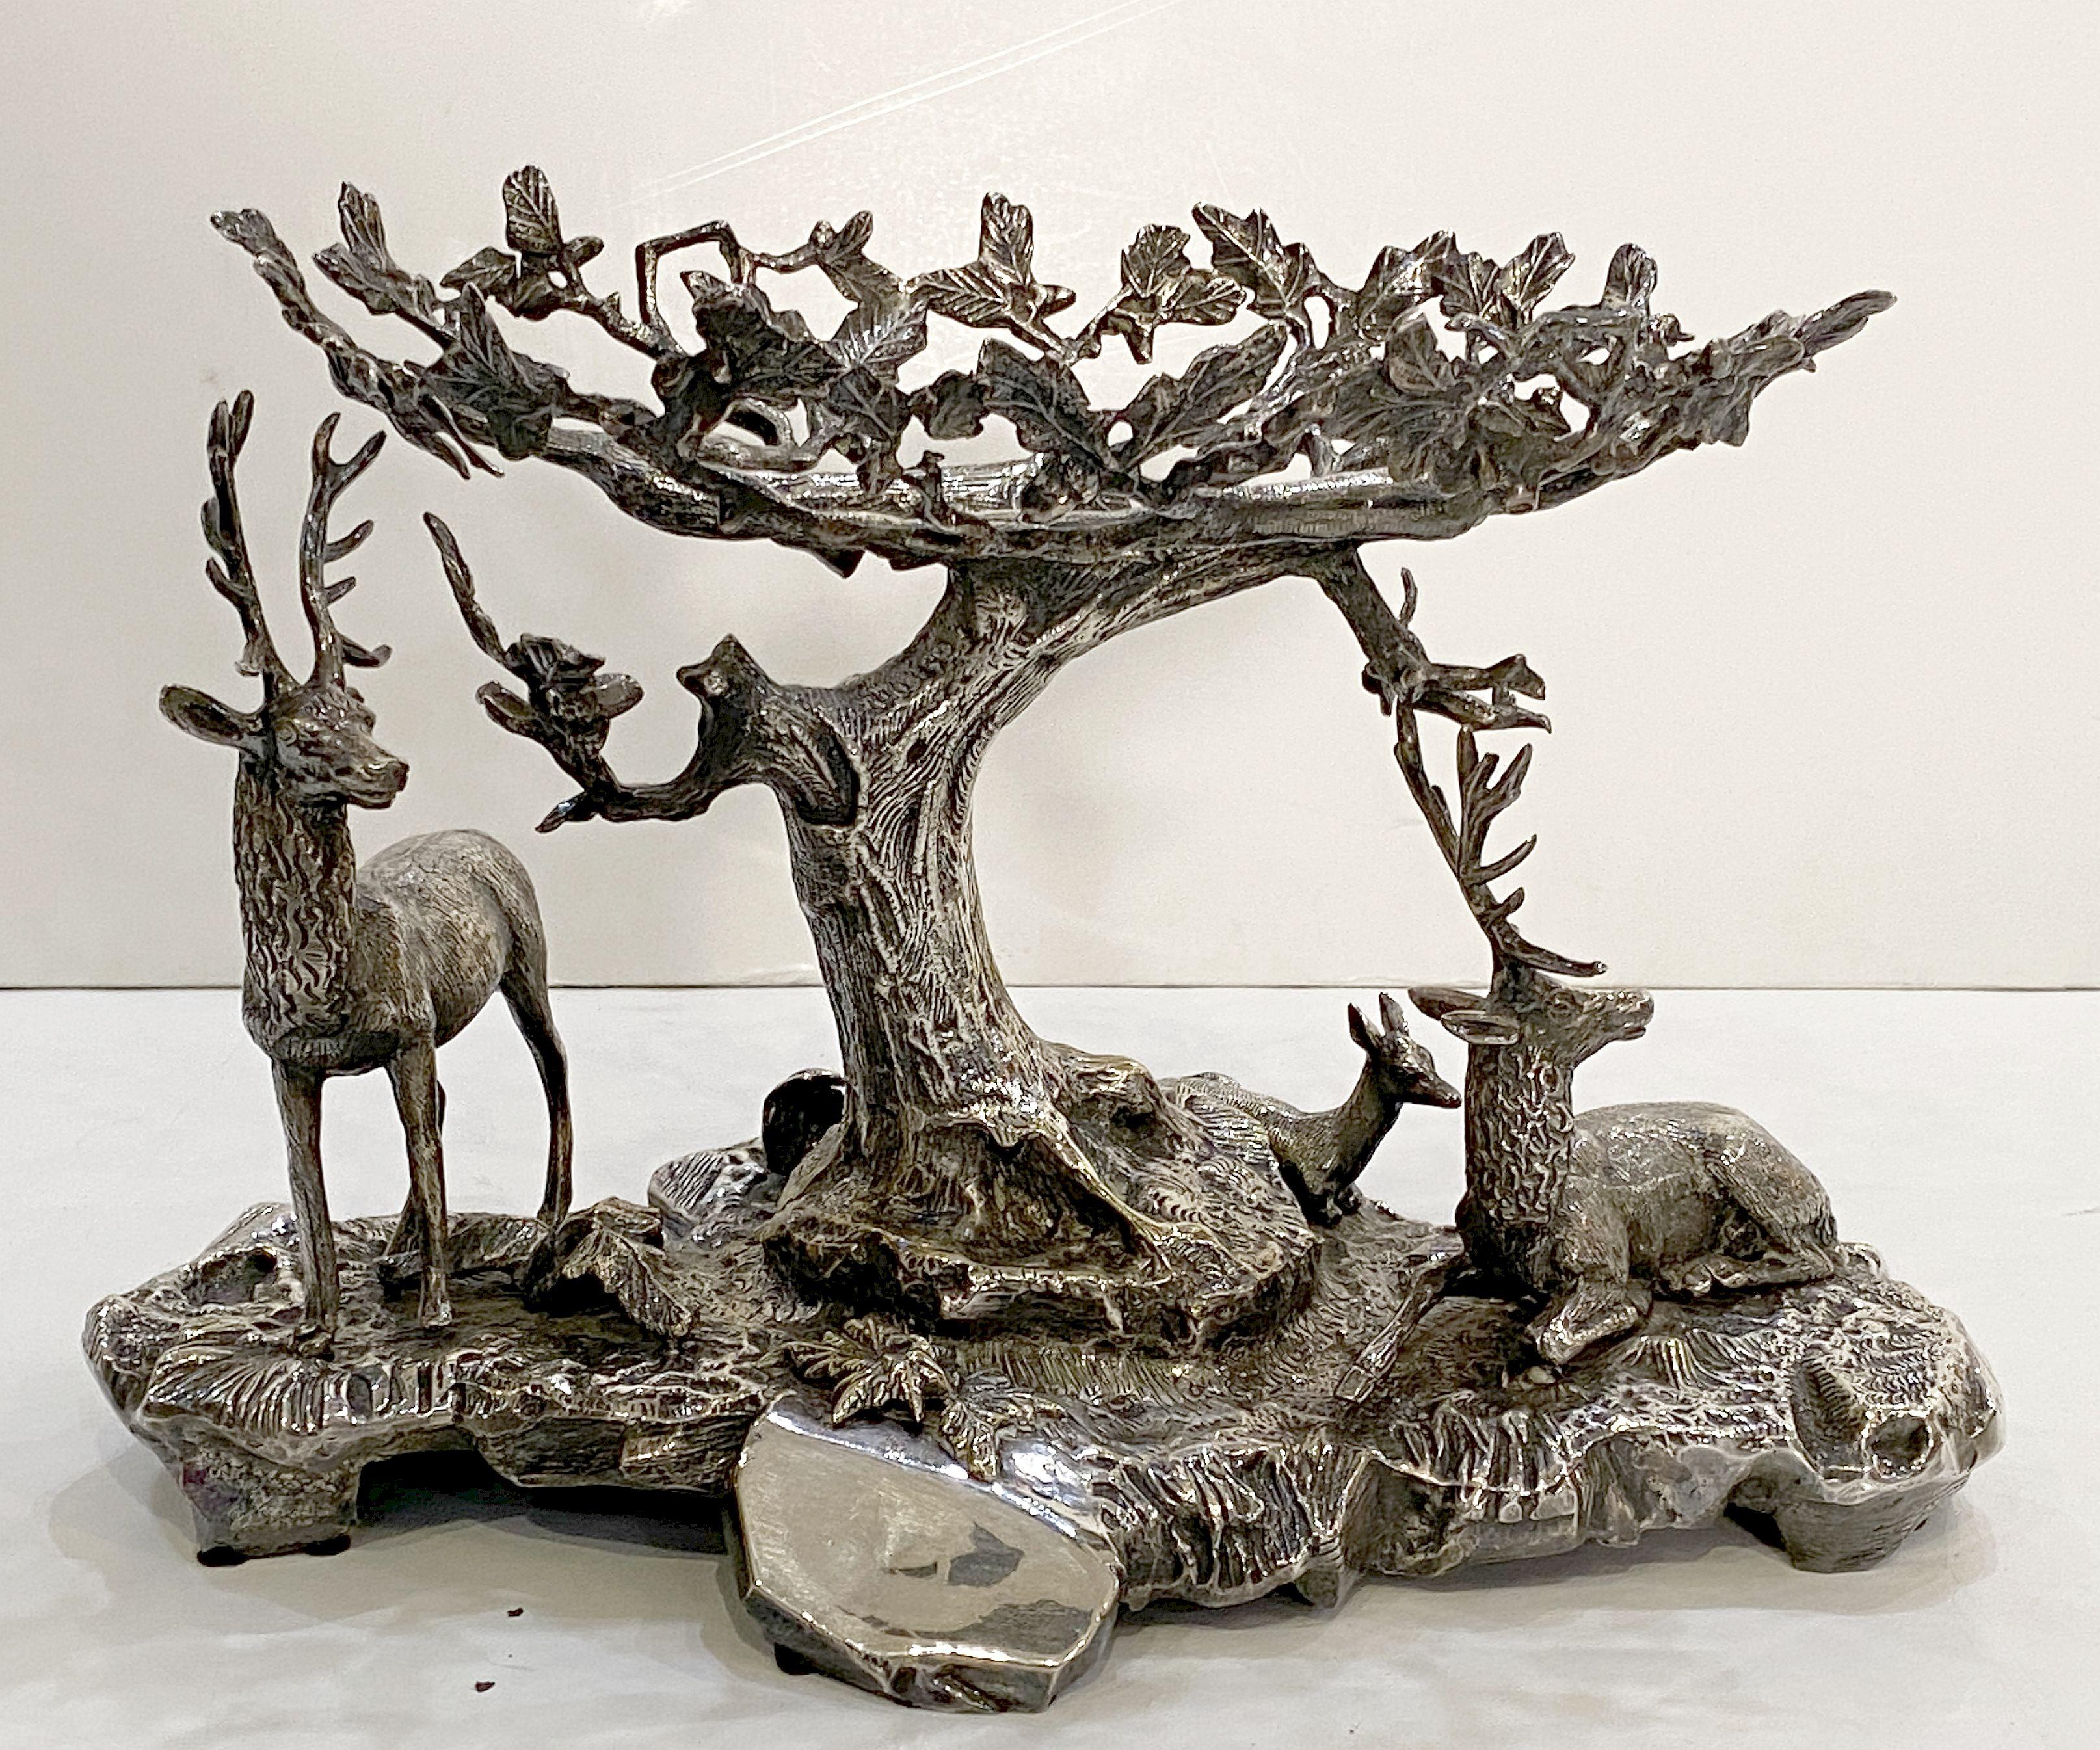 Valenti Sculptural Centerpiece of Stag and Deer of Silver Plated Bronze

A beautiful centerpiece figural sculpture of stag and deer resting under the boughs of an oak tree in fine plate silver over bronze, by the renowned Spanish design house,